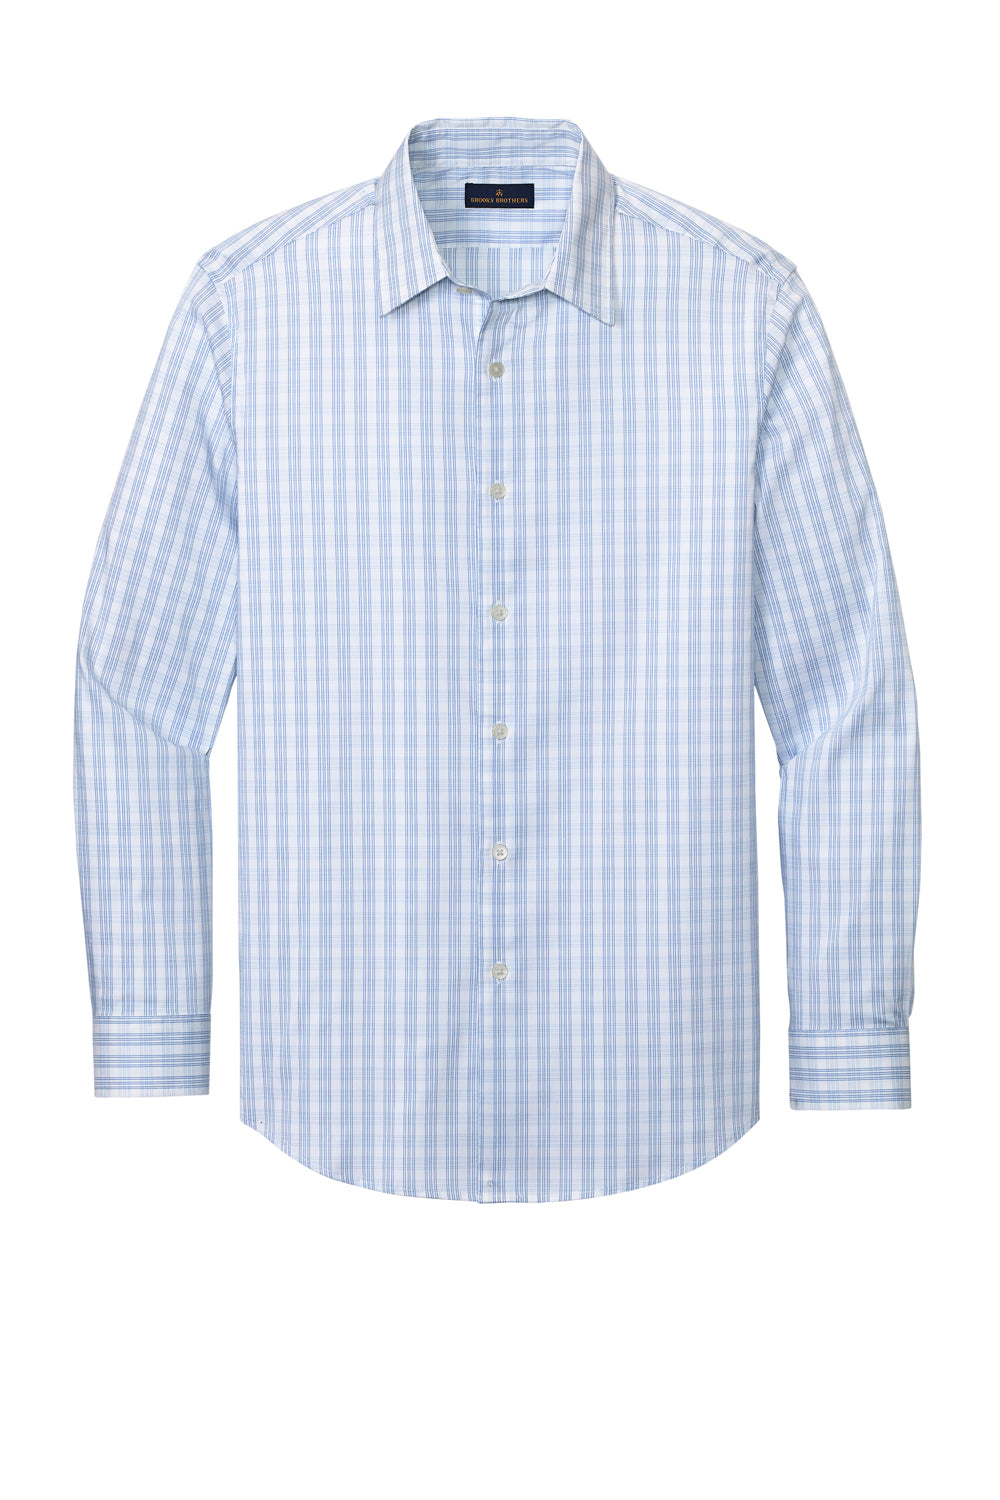 Brooks Brothers Mens Tech Stretch Long Sleeve Button Down Shirt White/Newport Blue Flat Front